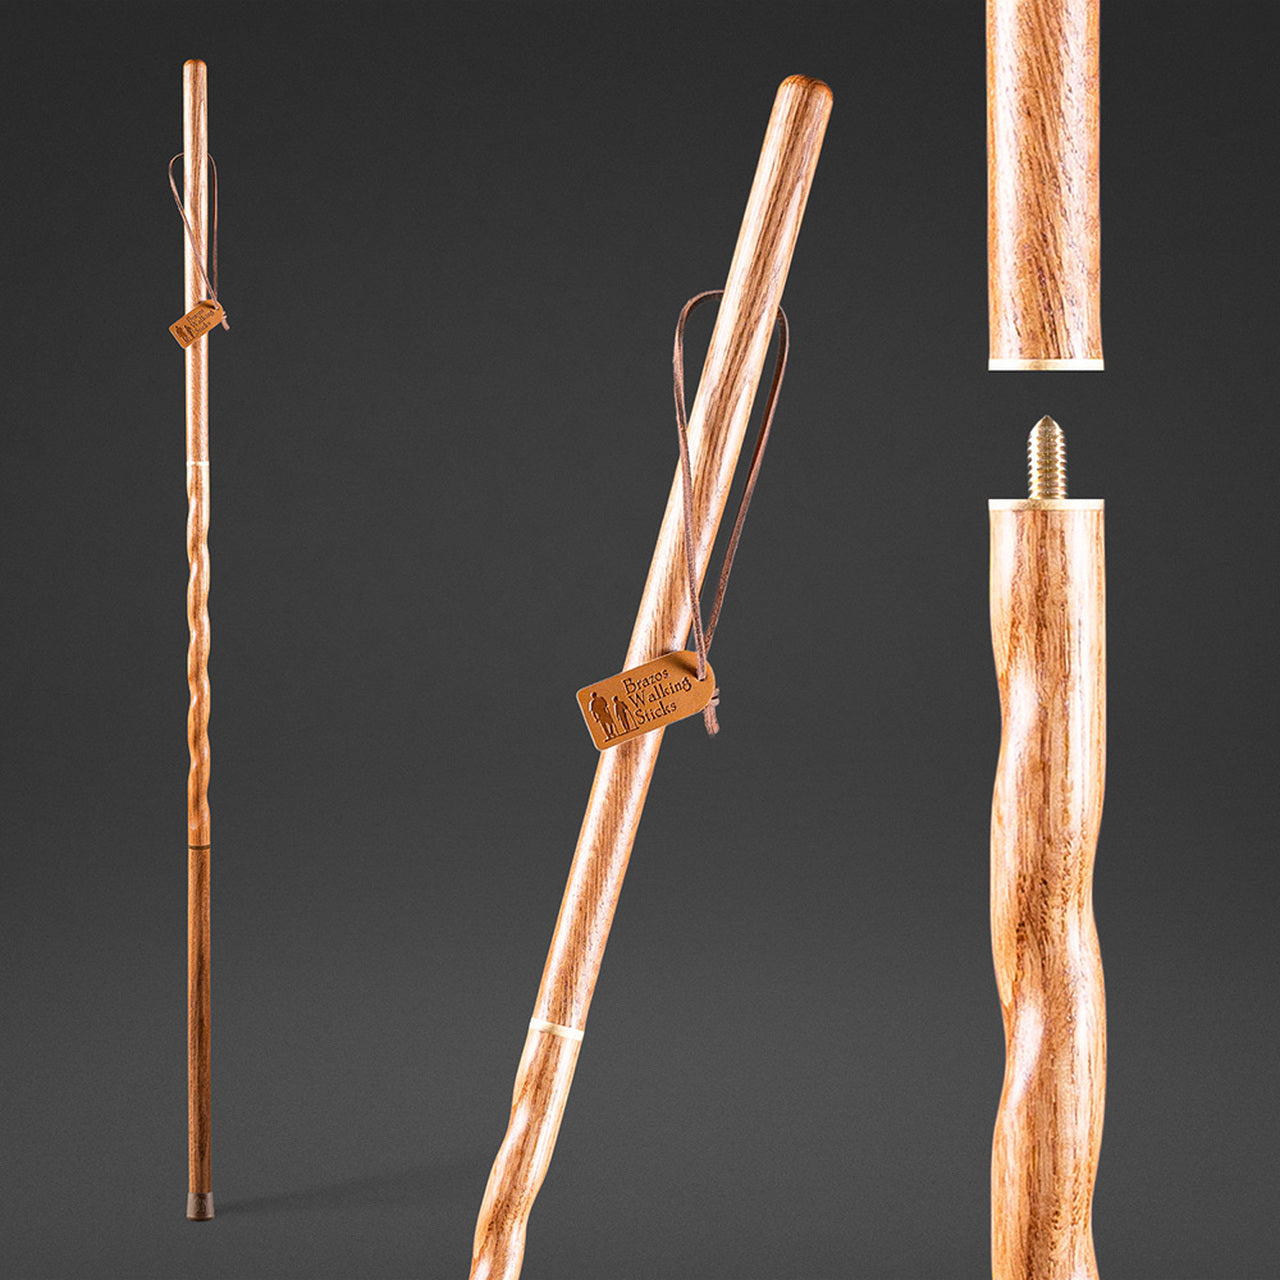 How to Make a Custom Fancy Walking Cane : 10 Steps (with Pictures